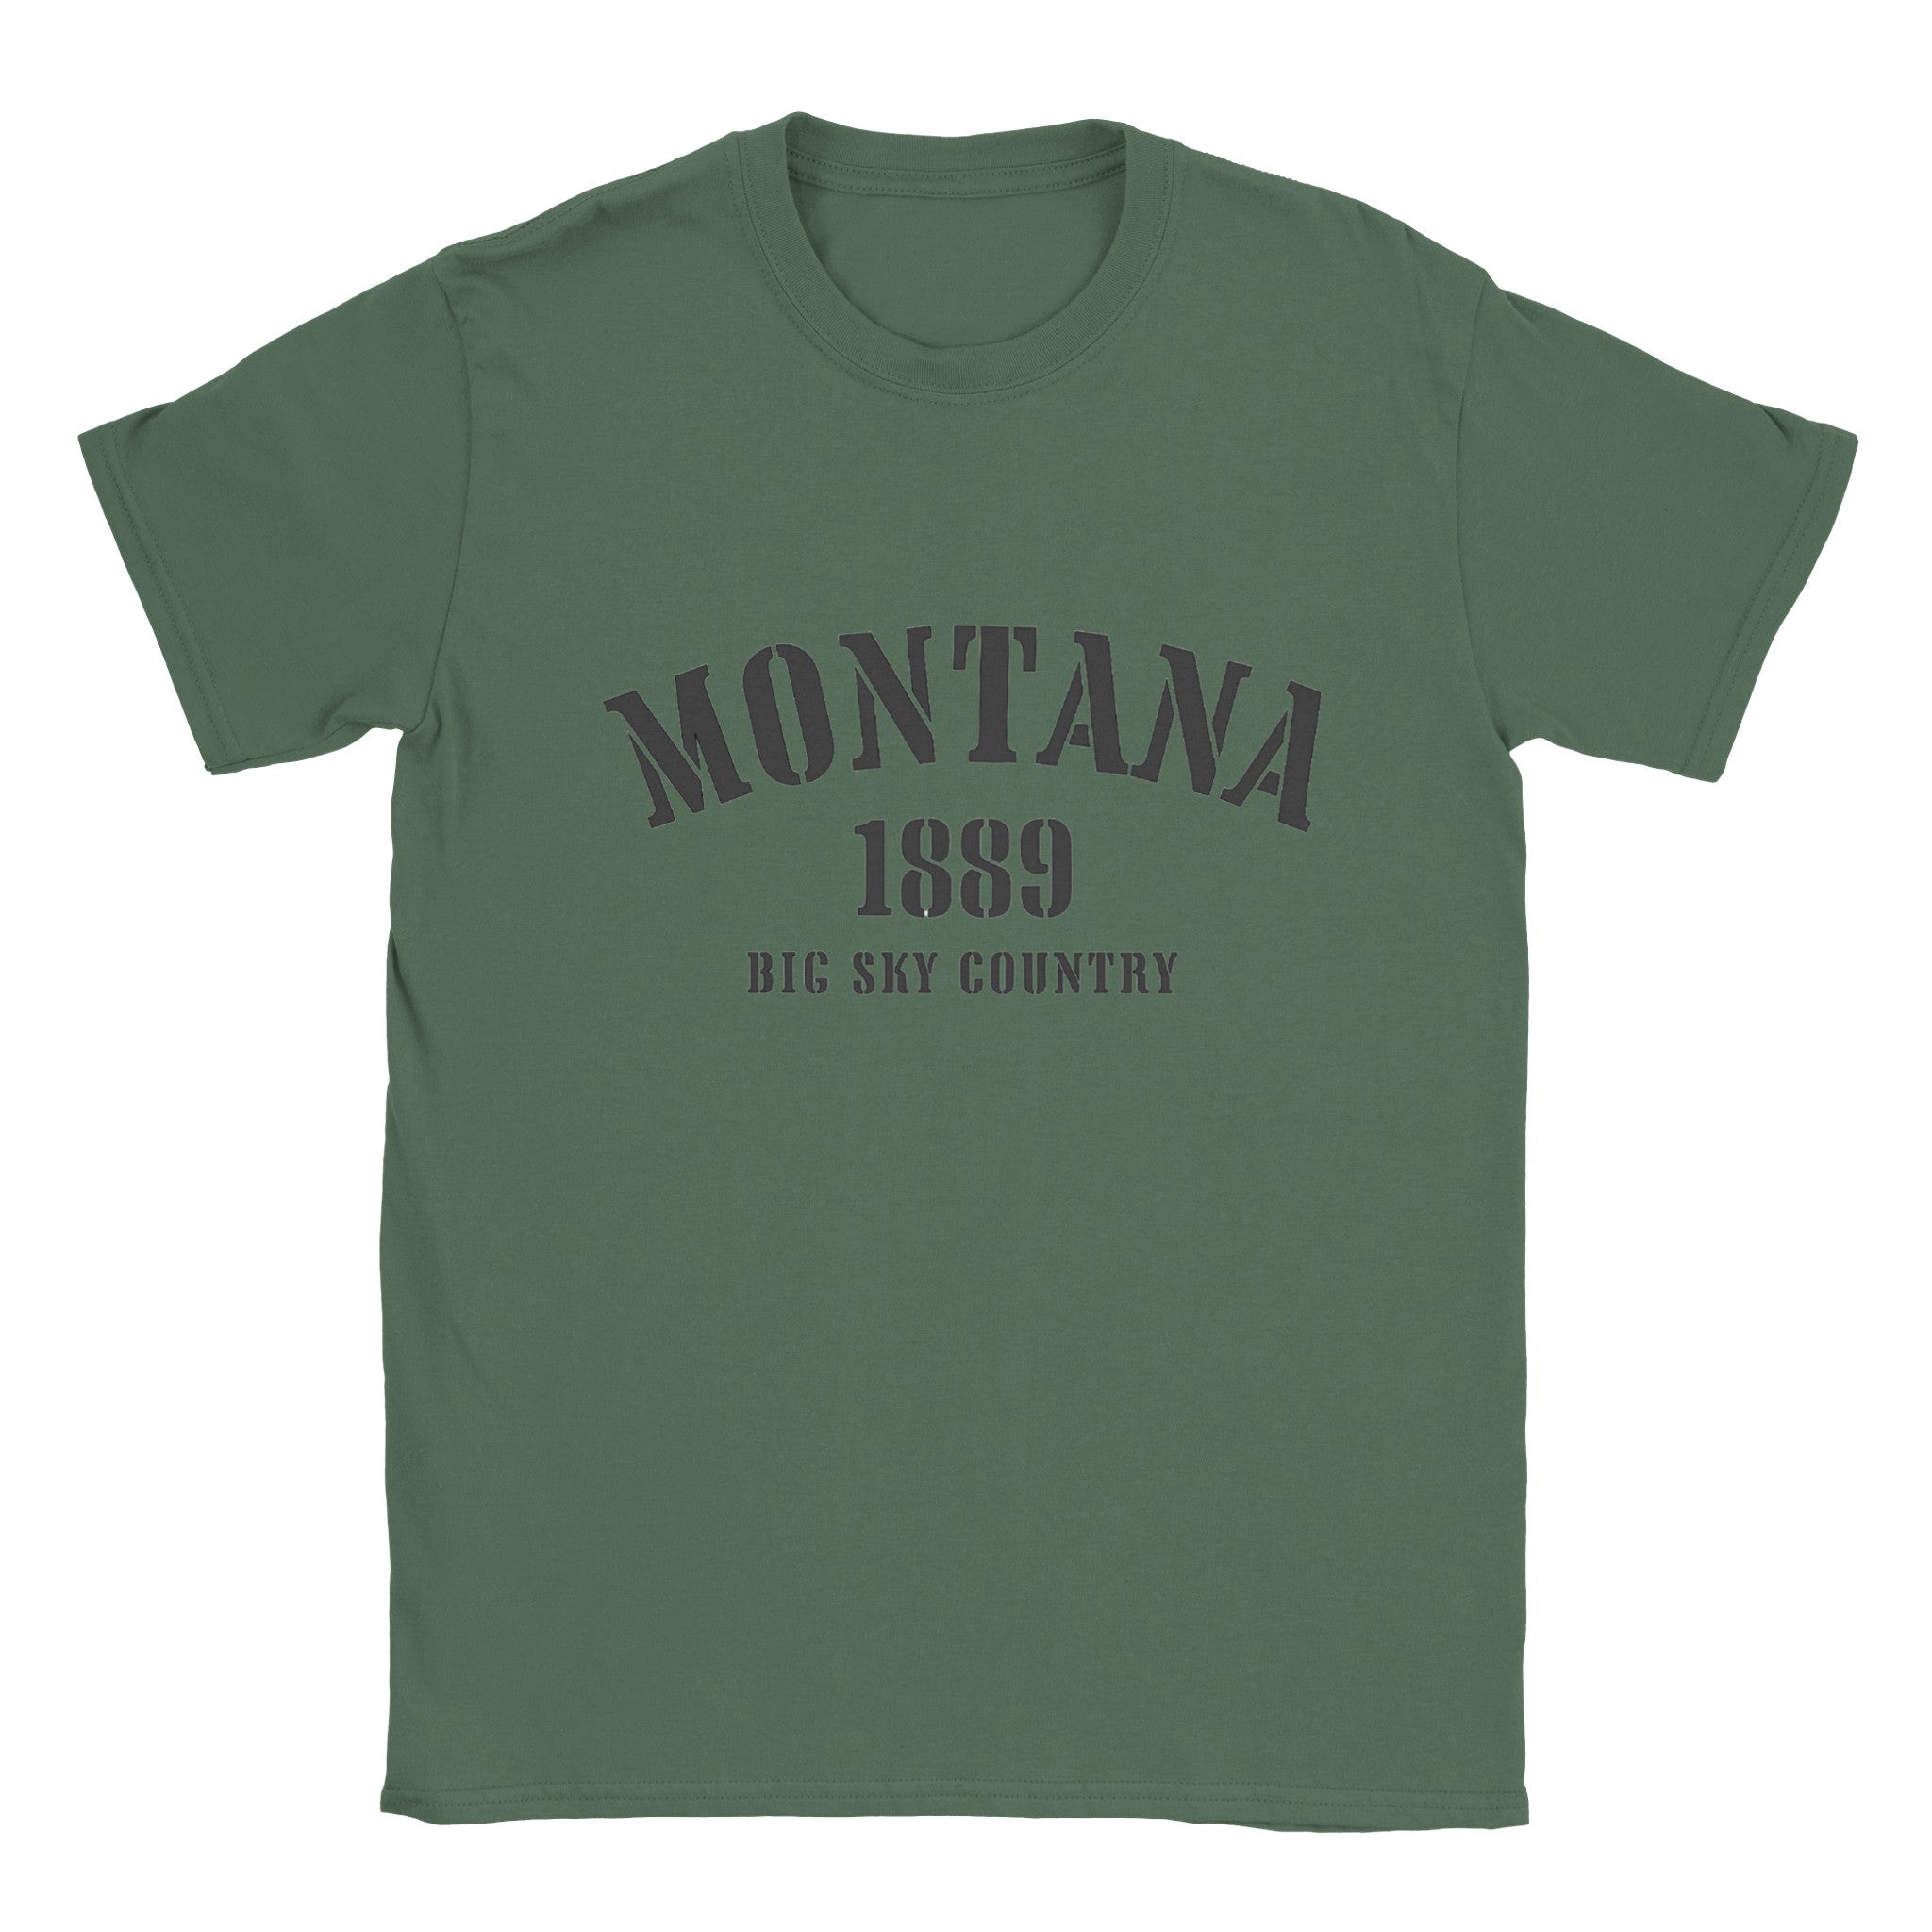 Montana- Classic Unisex Crewneck States T-shirt - Creations by Chris and Carlos